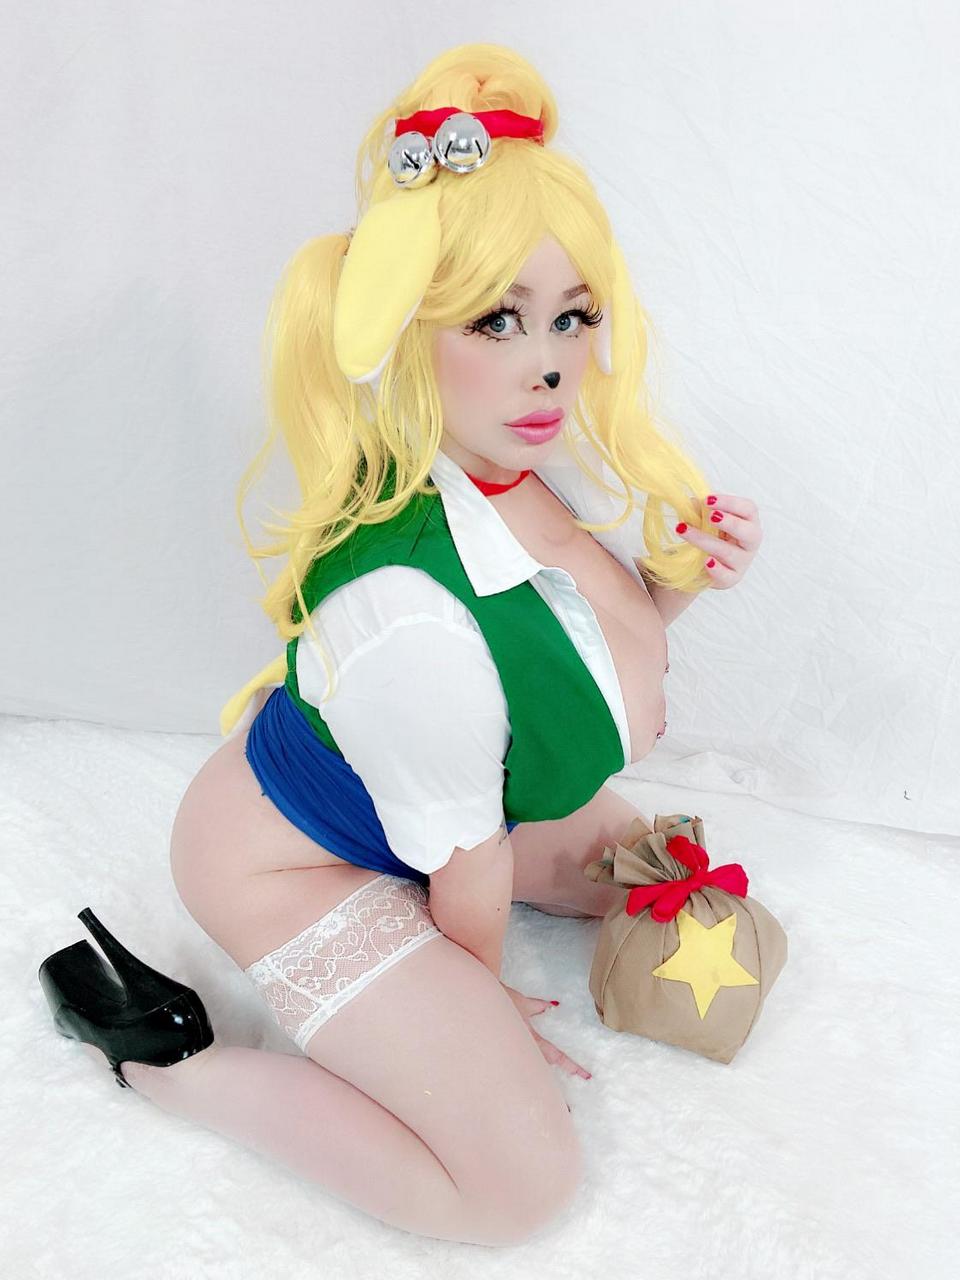 NSFW Self Post My Lewd Isabelle A